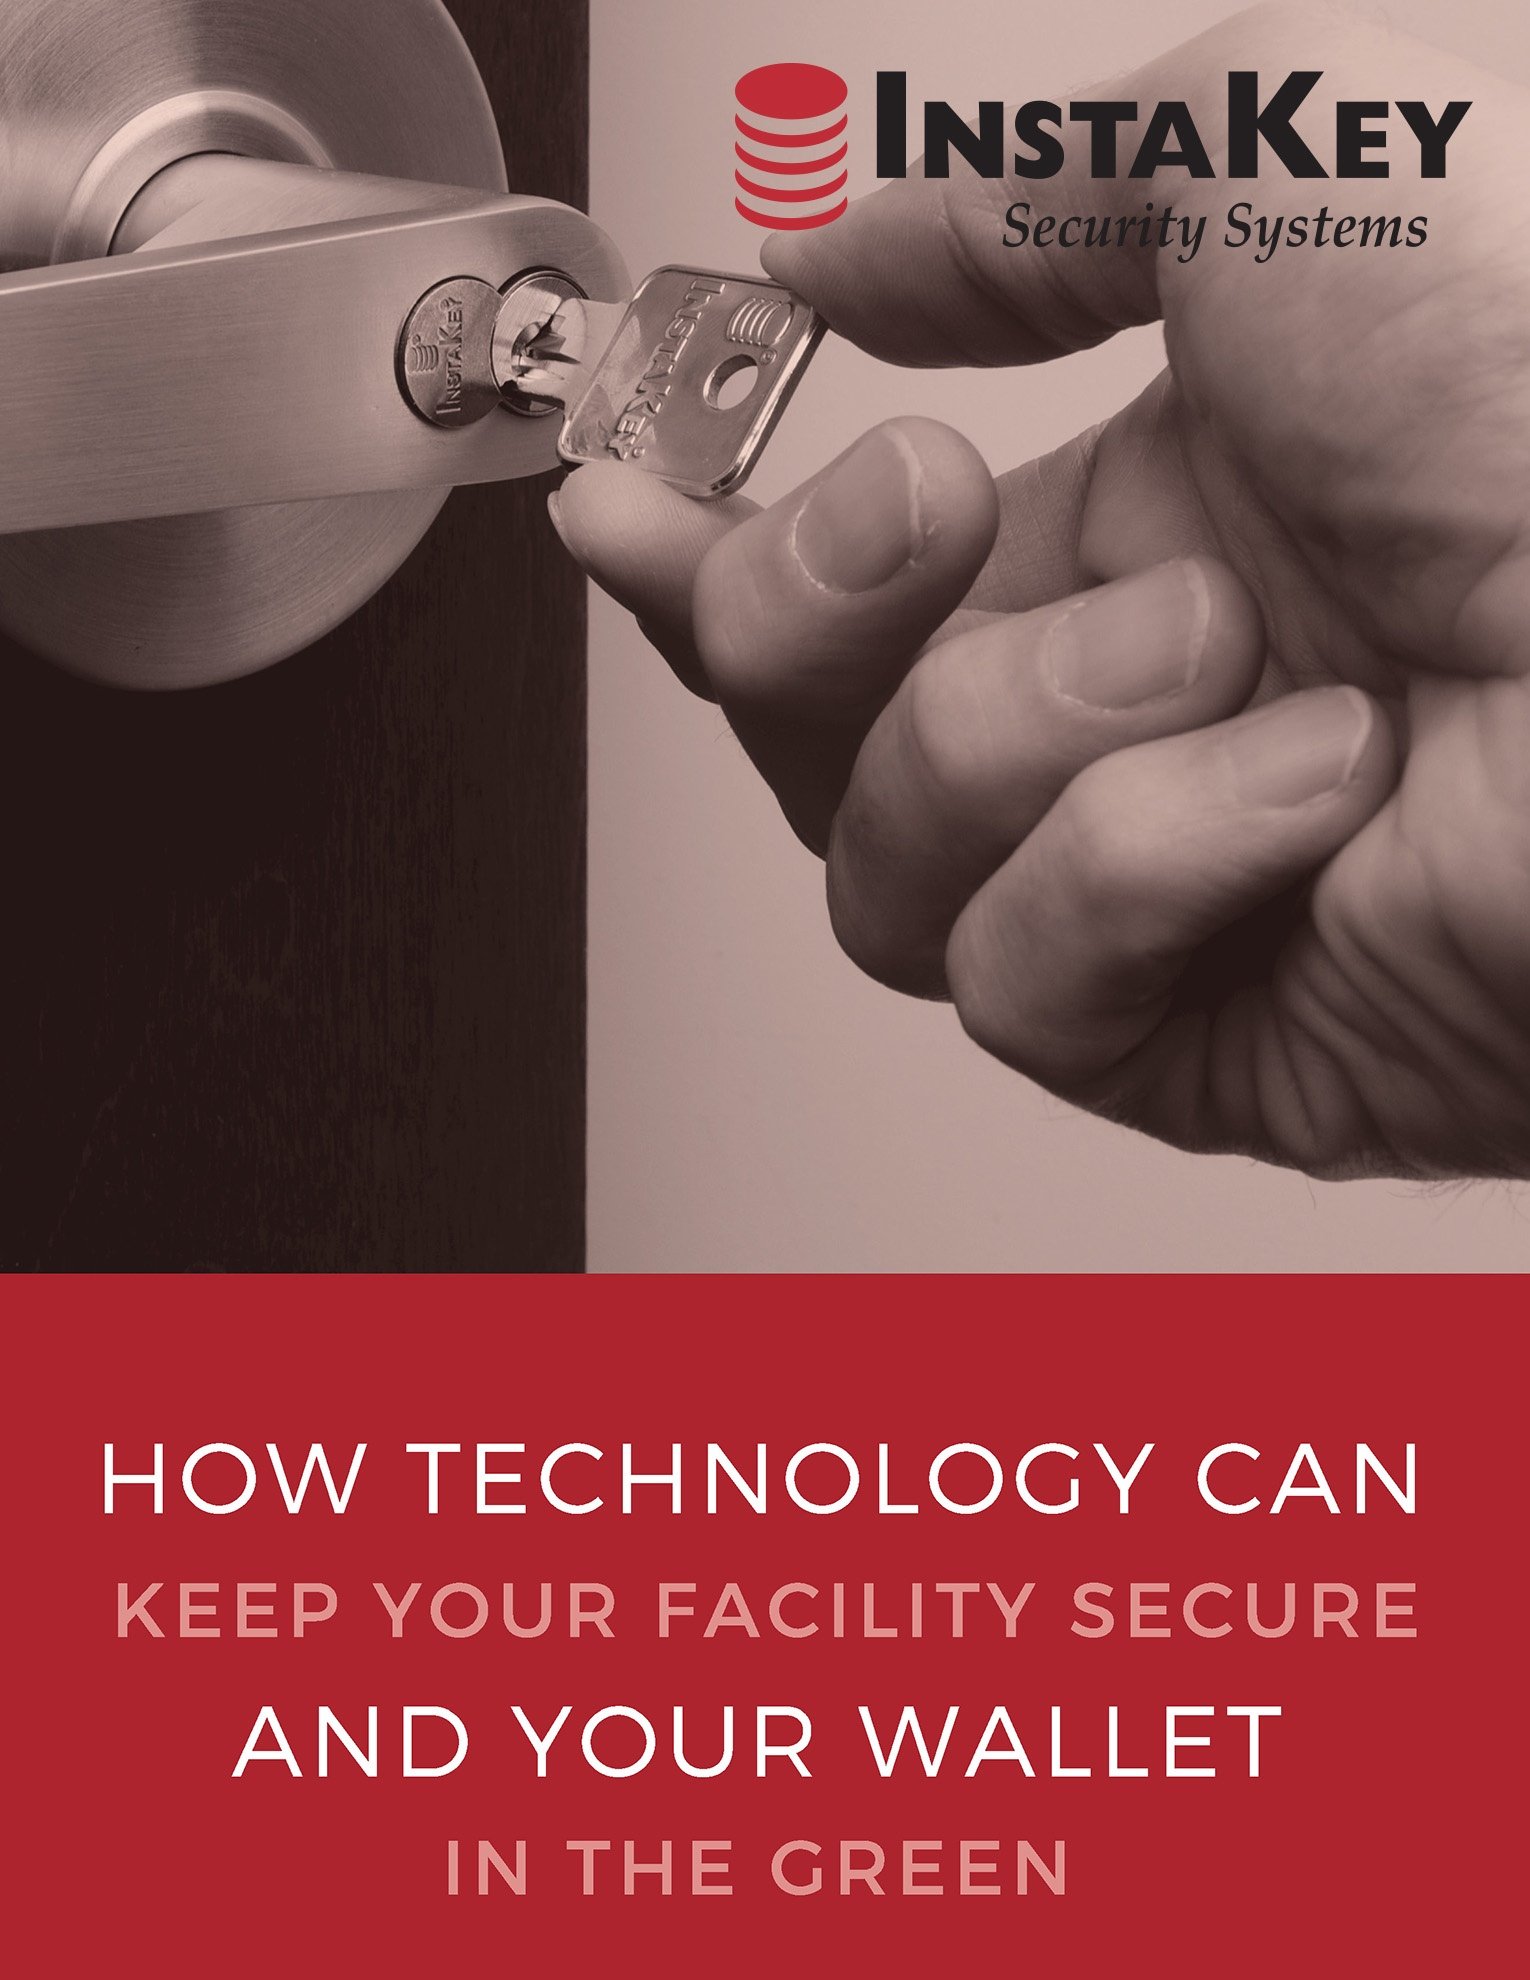 How Technology Can Keep Your Facility Secure and Your Wallet in the Green